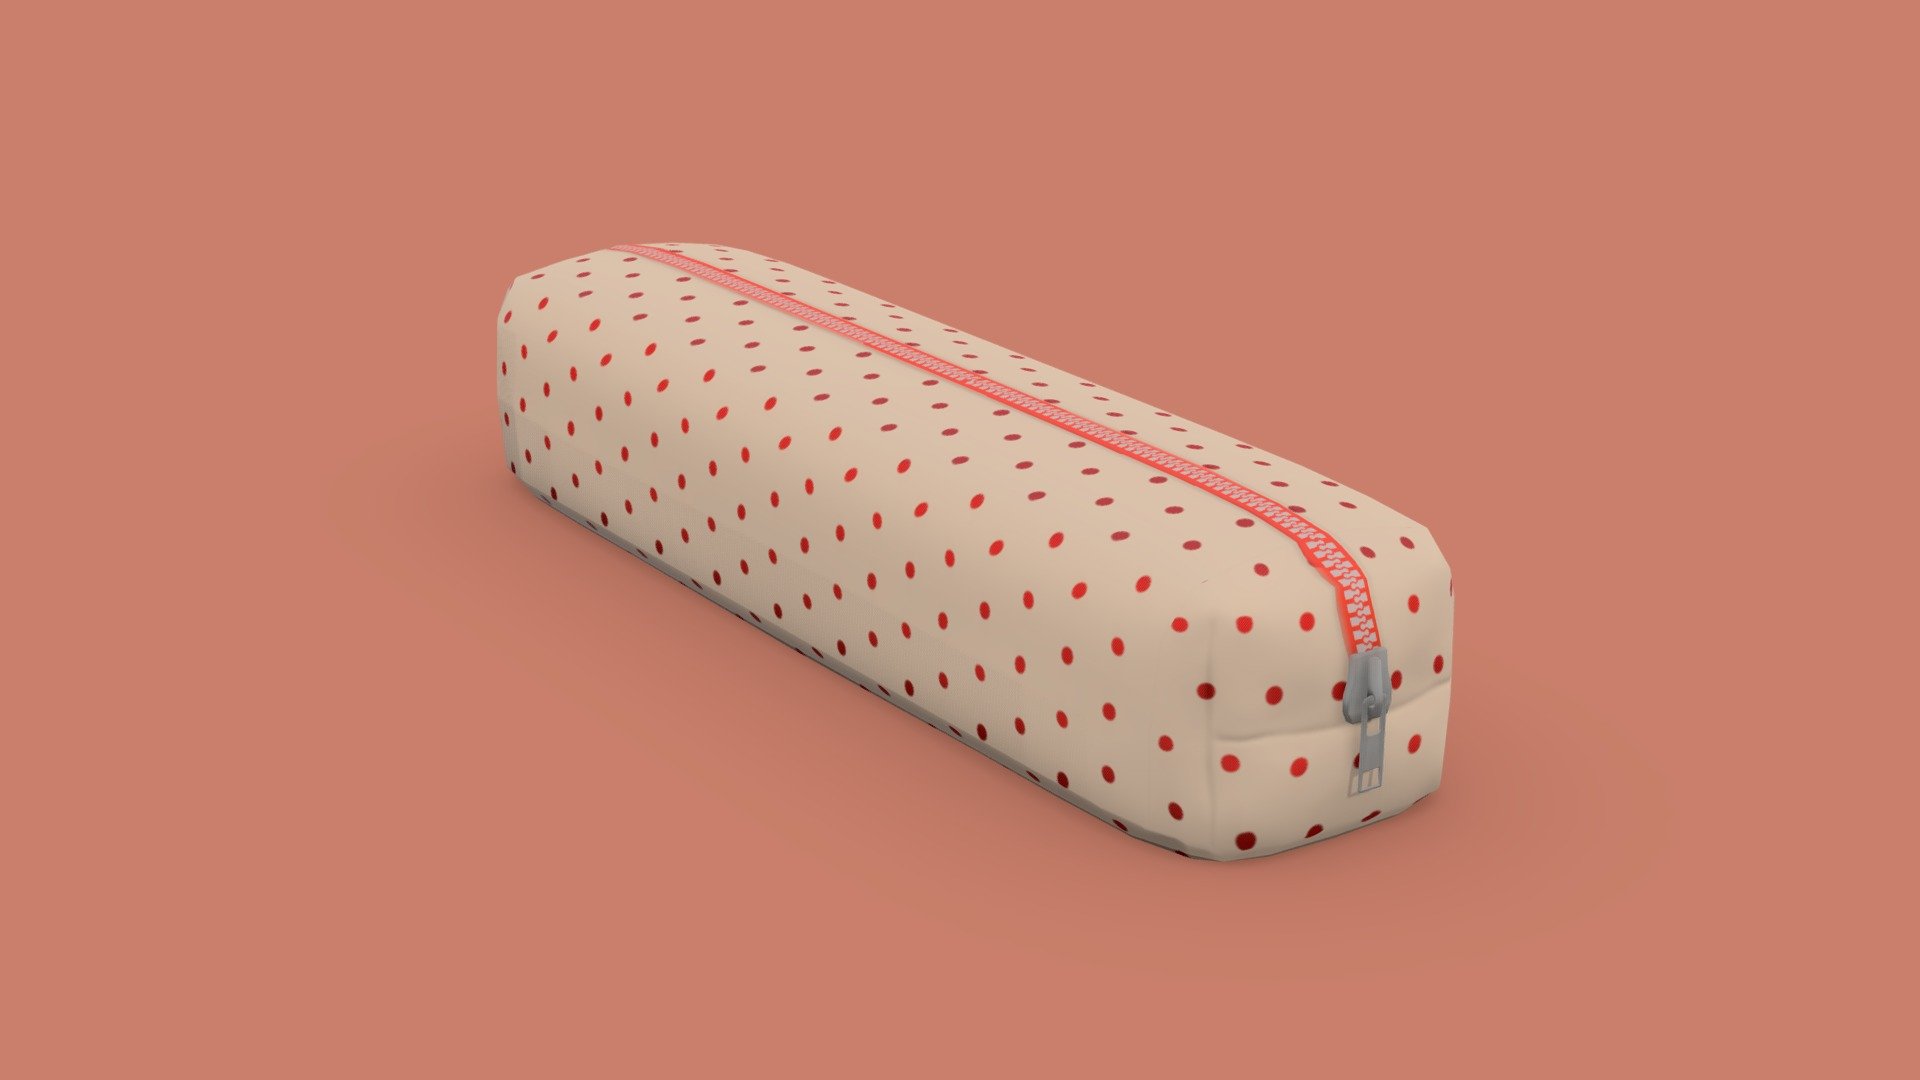 Low Poly Pencil Case for your renders and games

Textures:

Diffuse color, Roughness, Metallic, Height

All textures are 2K

Files Formats:

Blend

Fbx

Obj - Pencil Case - Buy Royalty Free 3D model by Vanessa Araújo (@vanessa3d) 3d model